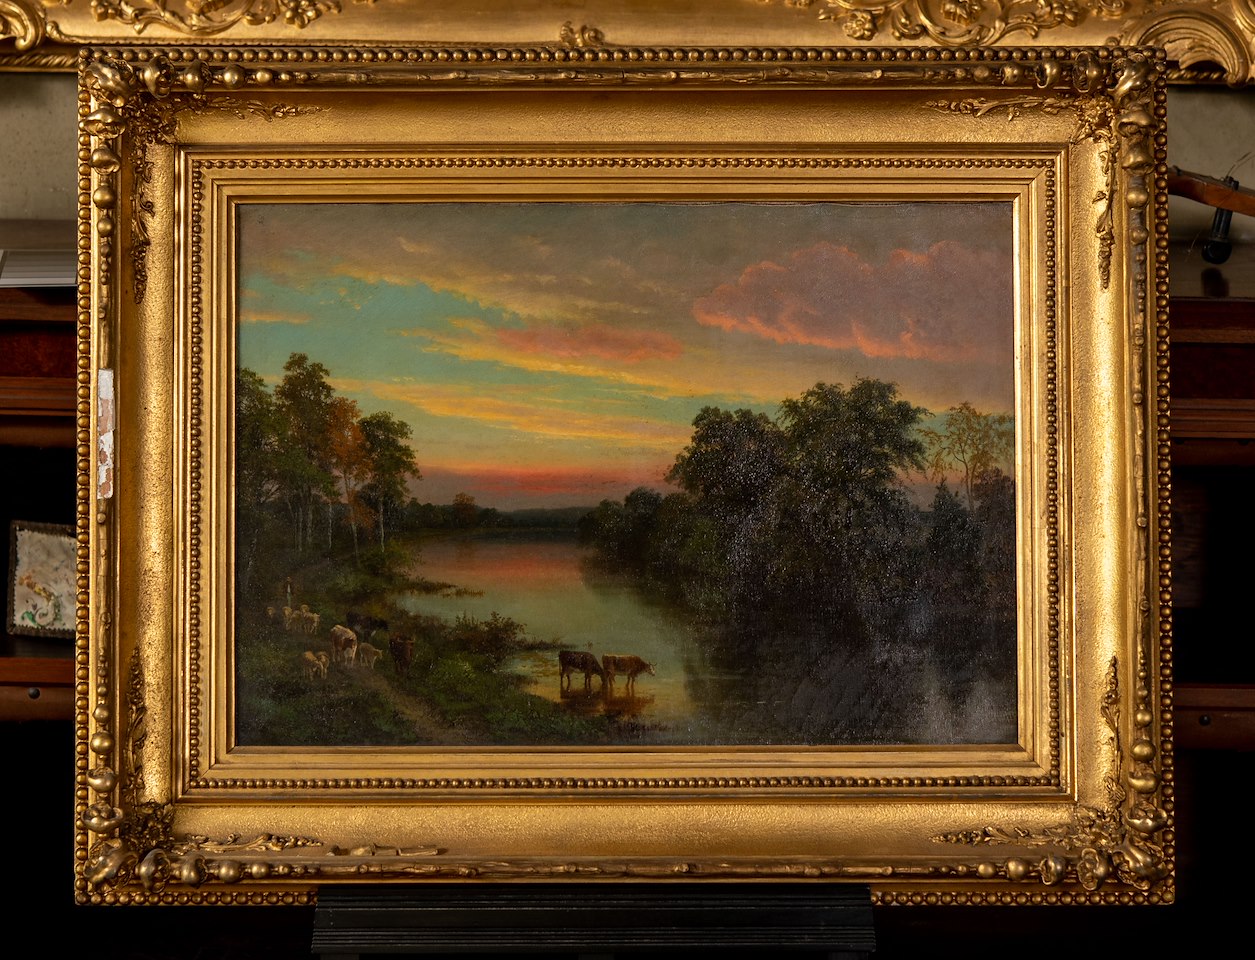 Painting of sunset over river with figure driving a herd of cattle on a tree-lined path